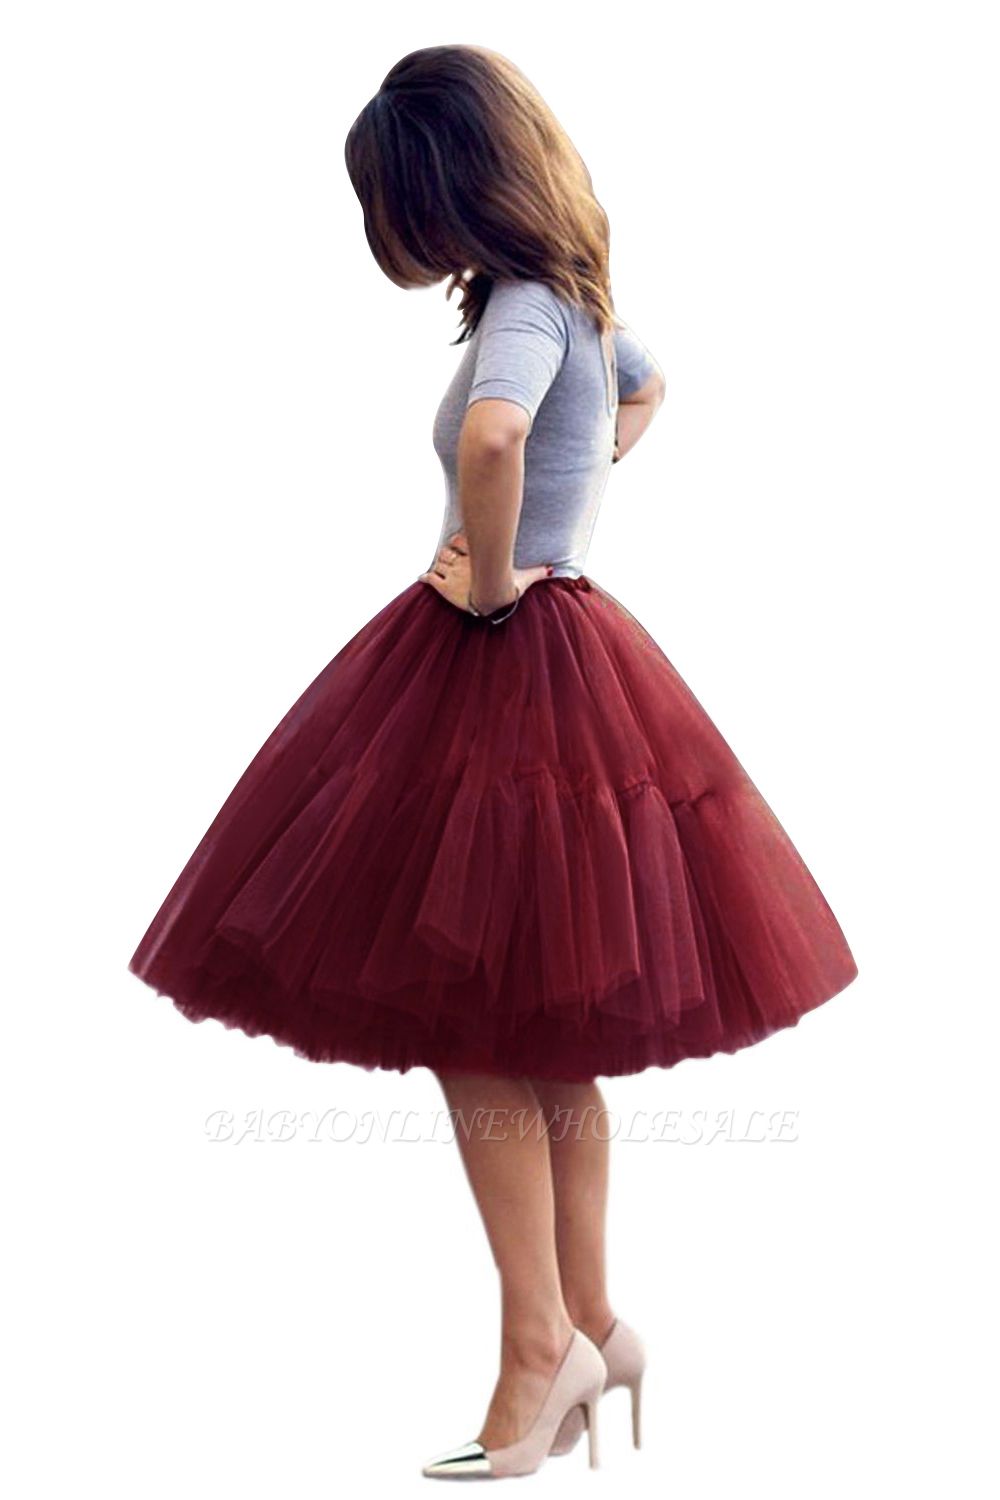 Puffy Knee-length Carnival Peticoat in Burgundy, White, Yellow, Gray, Pink, Mint Green